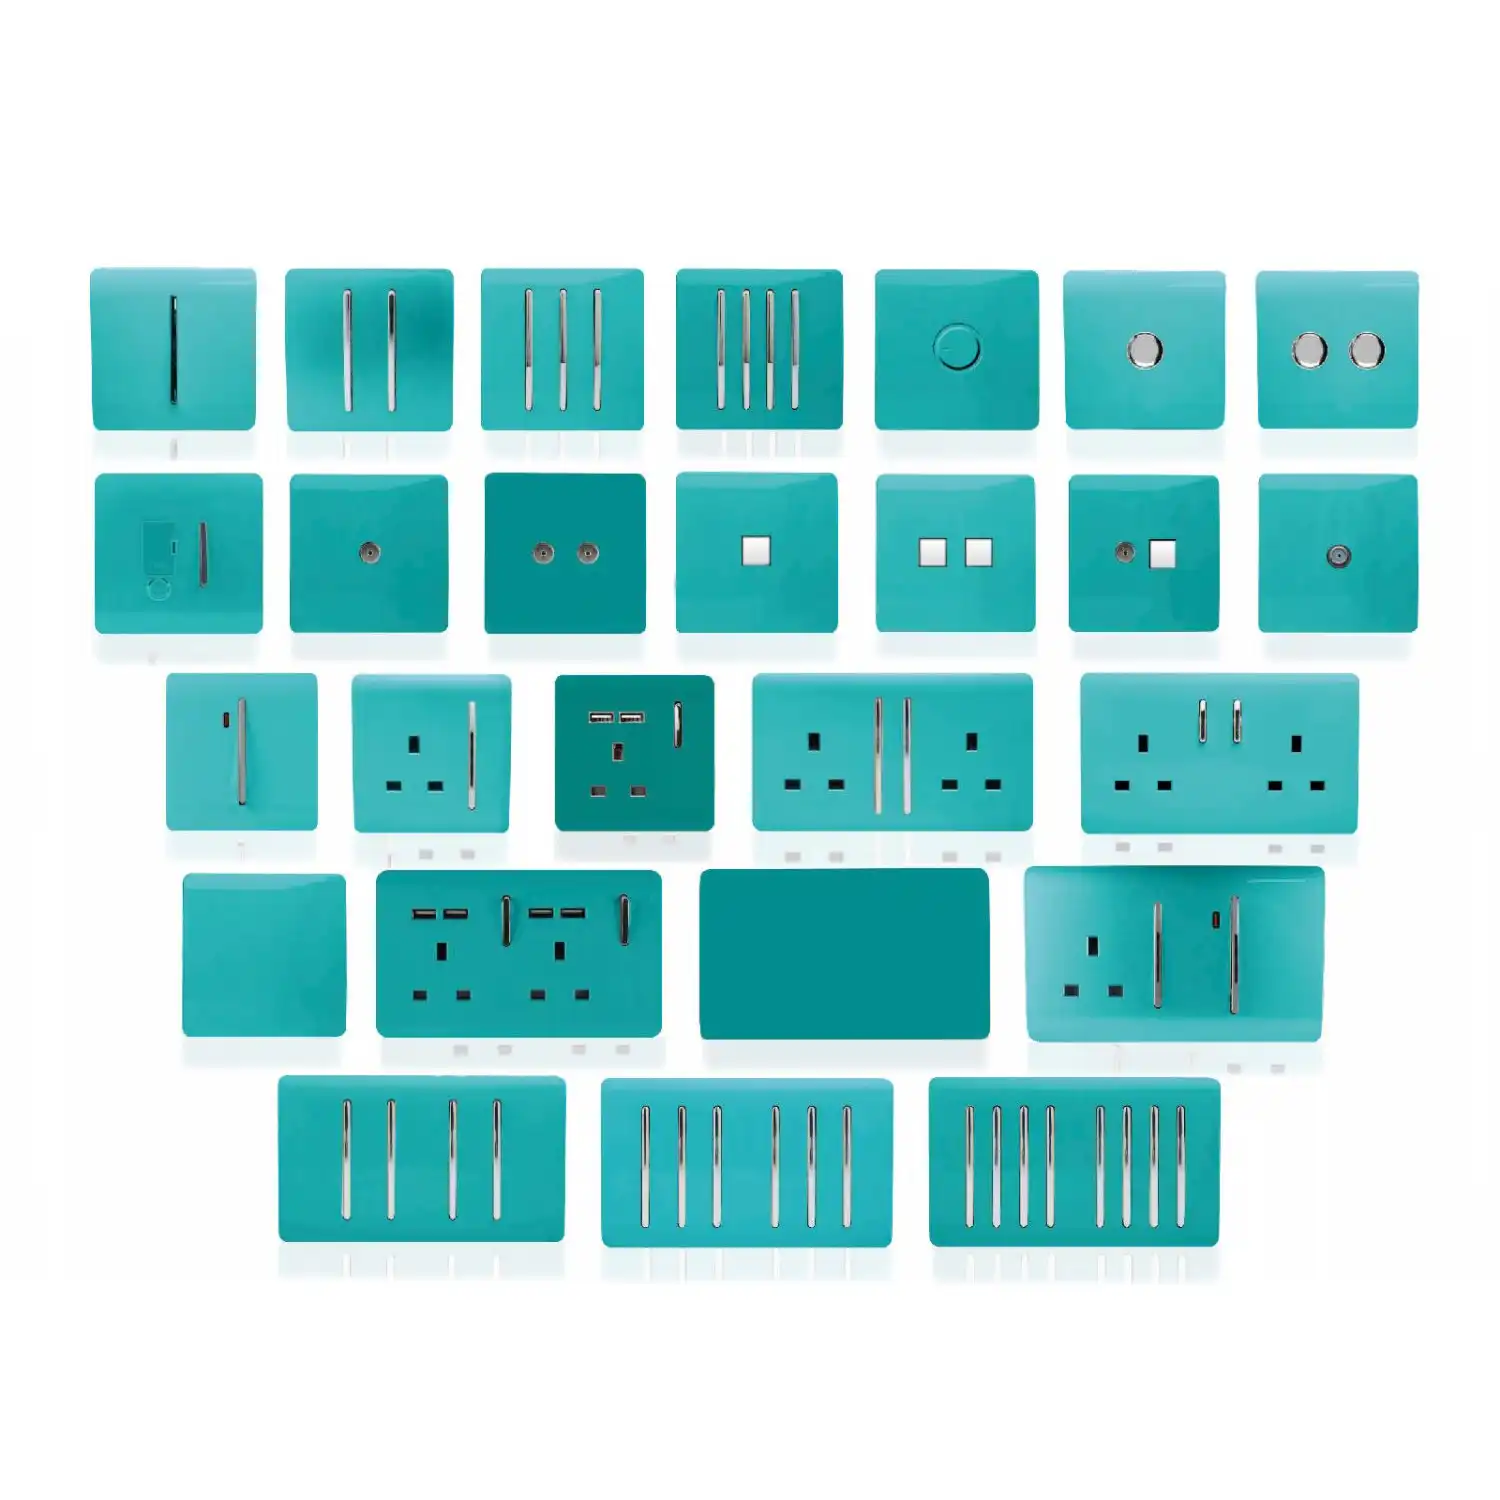 Trendi, Artistic Modern 1 Gang Blanking Plate Bright Teal Finish, BRITISH MADE, (25mm Back Box Required), 5yrs Warranty